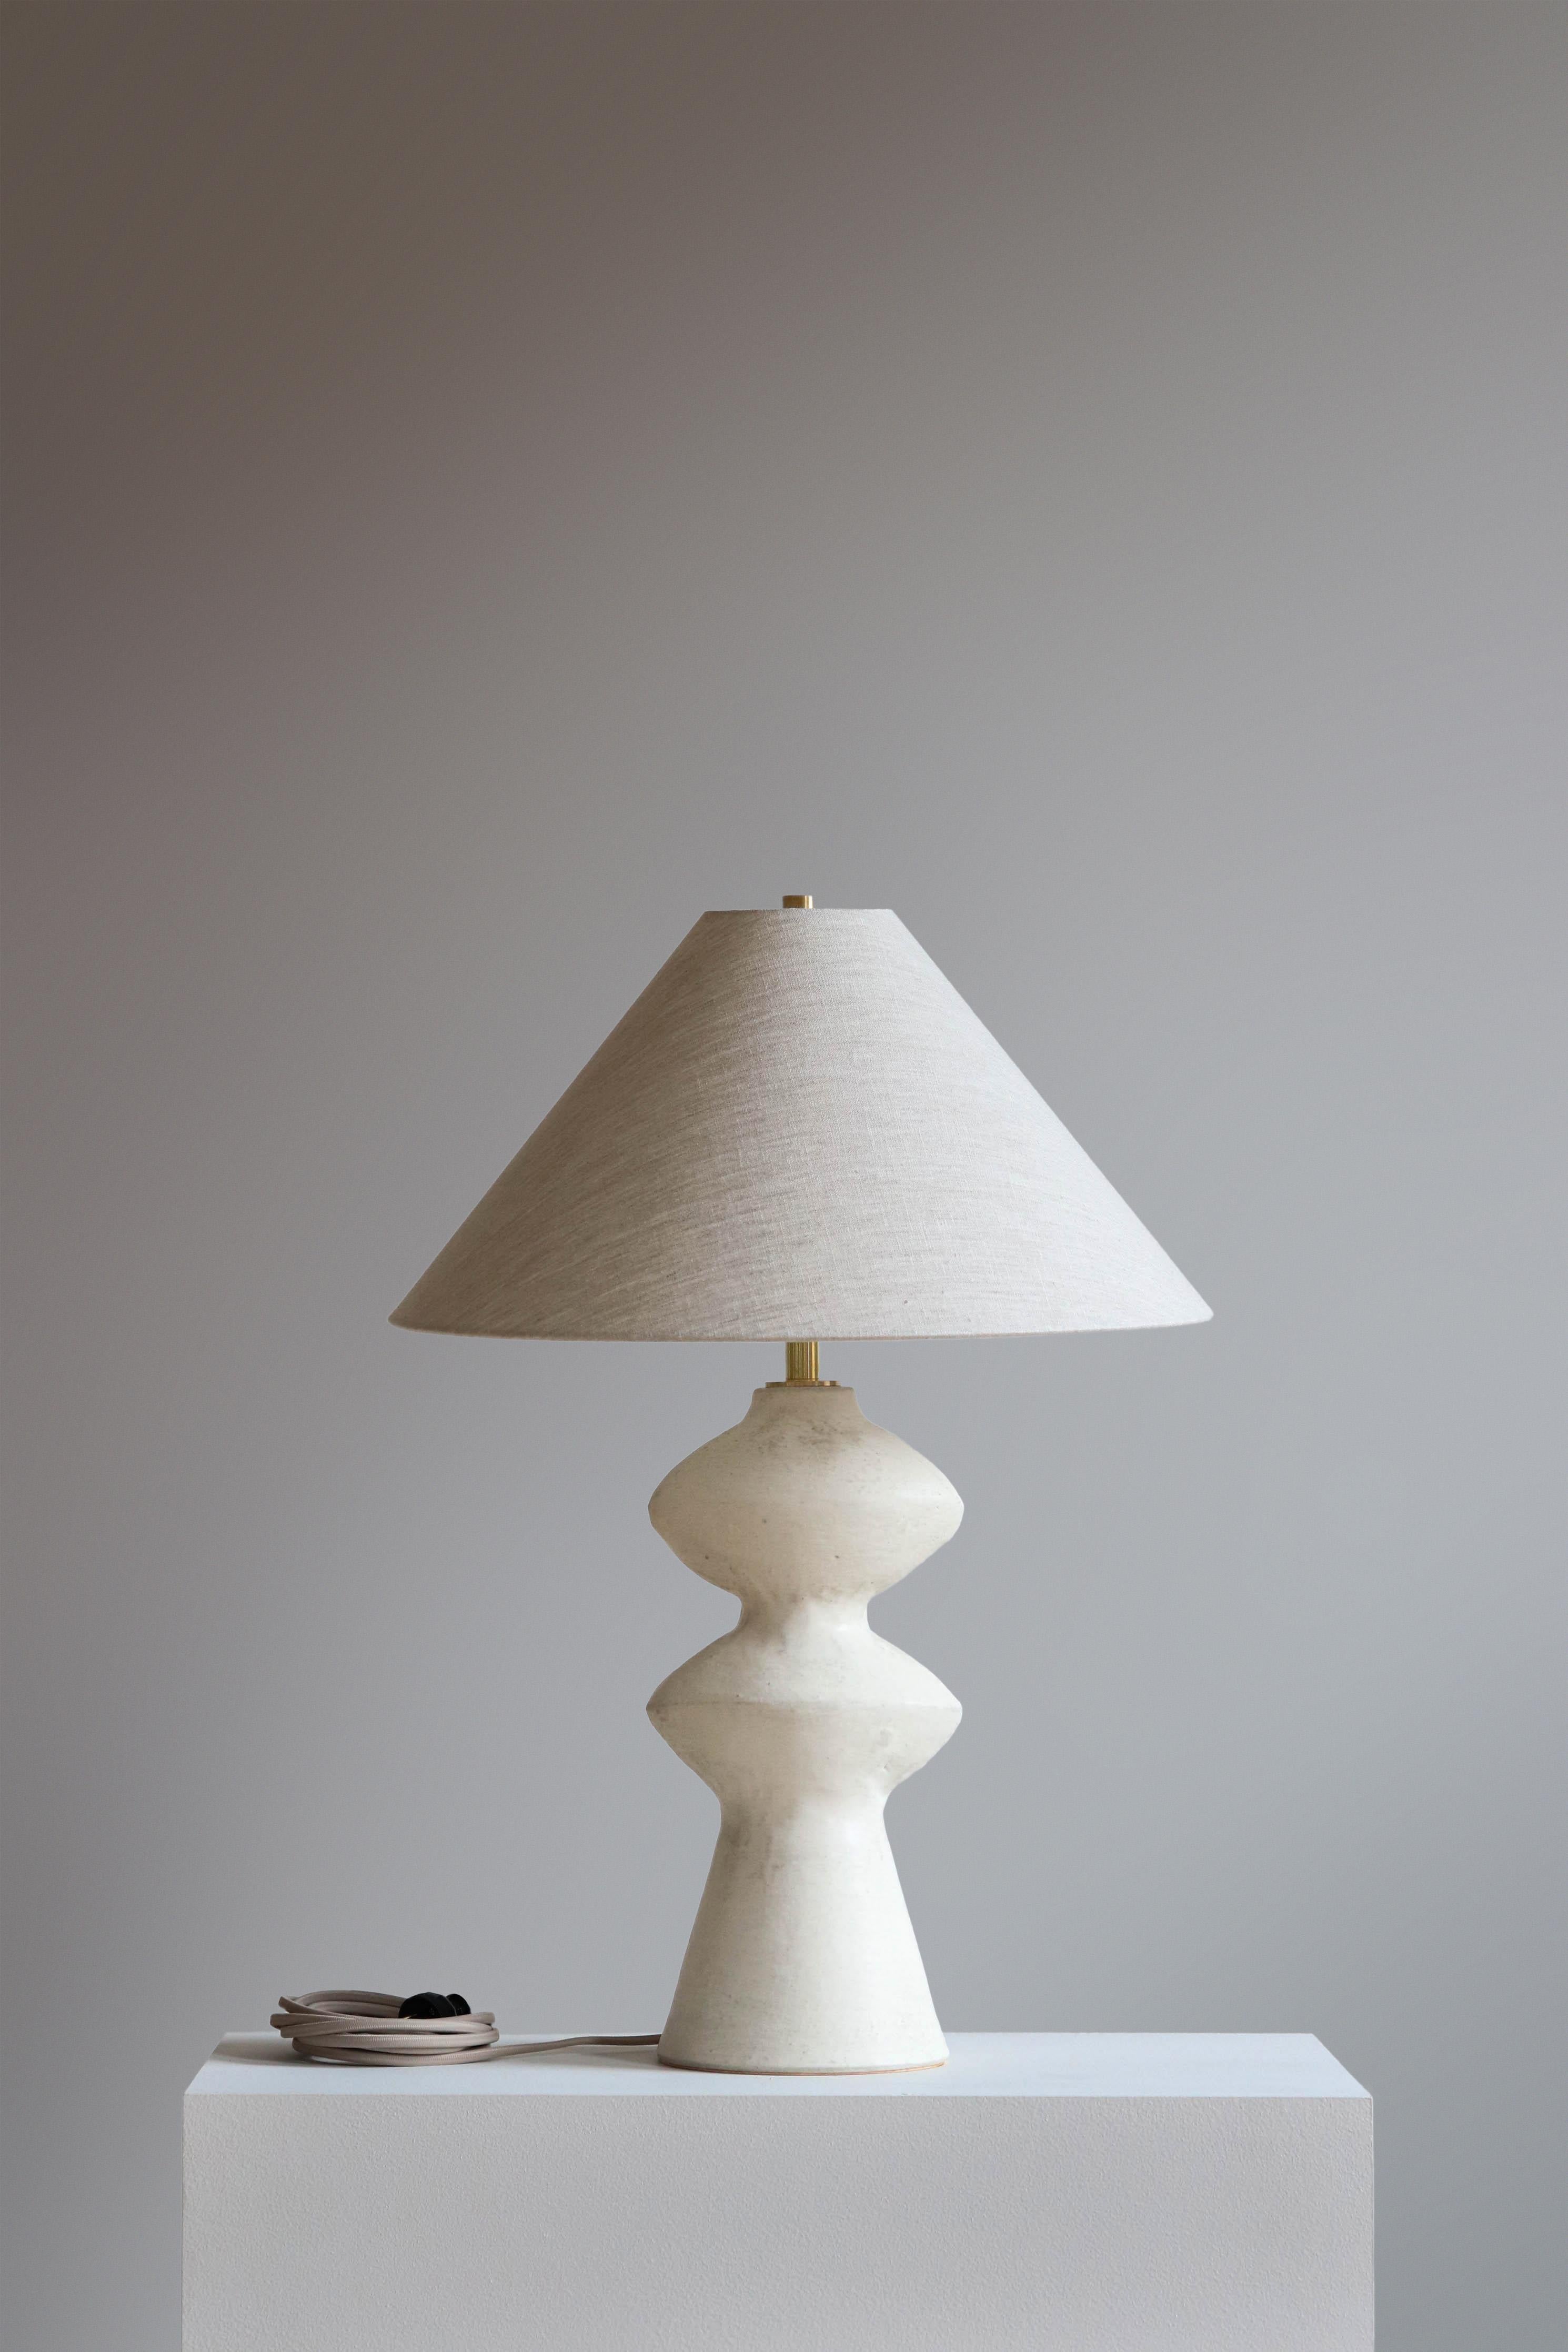 Stone Pollux 25 Table Lamp by Danny Kaplan Studio
Dimensions: ⌀ 45 x H 64 cm
Materials: Glazed Ceramic, Unfinished Brass, Wax Paper

This item is handmade, and may exhibit variability within the same piece. We do our best to maintain a consistent